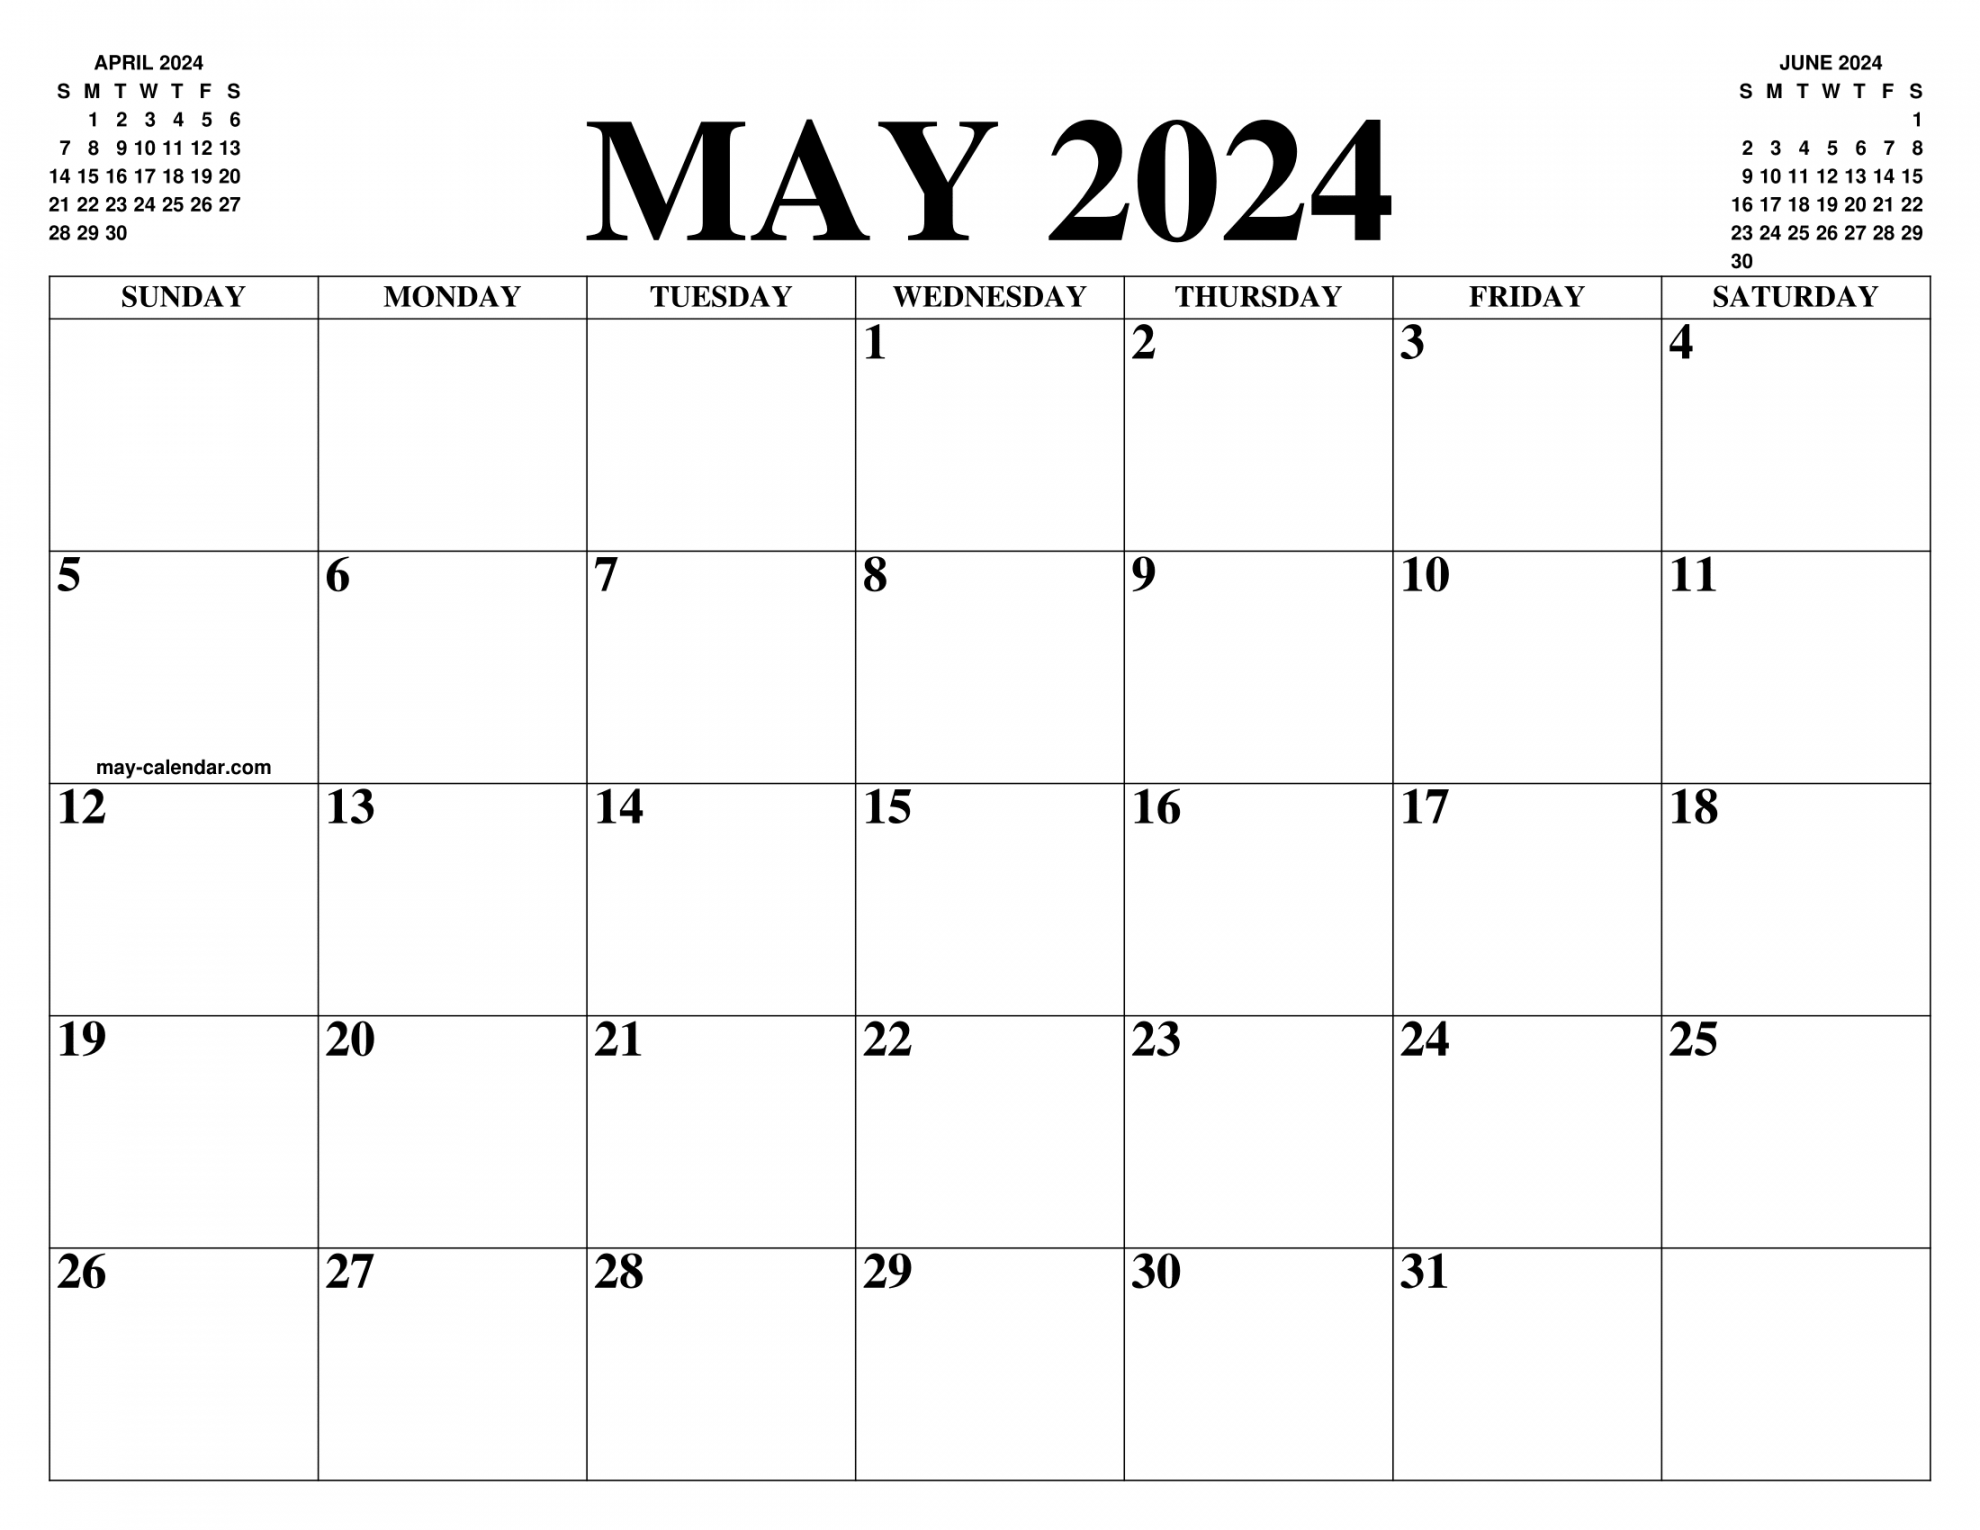 MAY CALENDAR OF THE MONTH: FREE PRINTABLE MAY CALENDAR